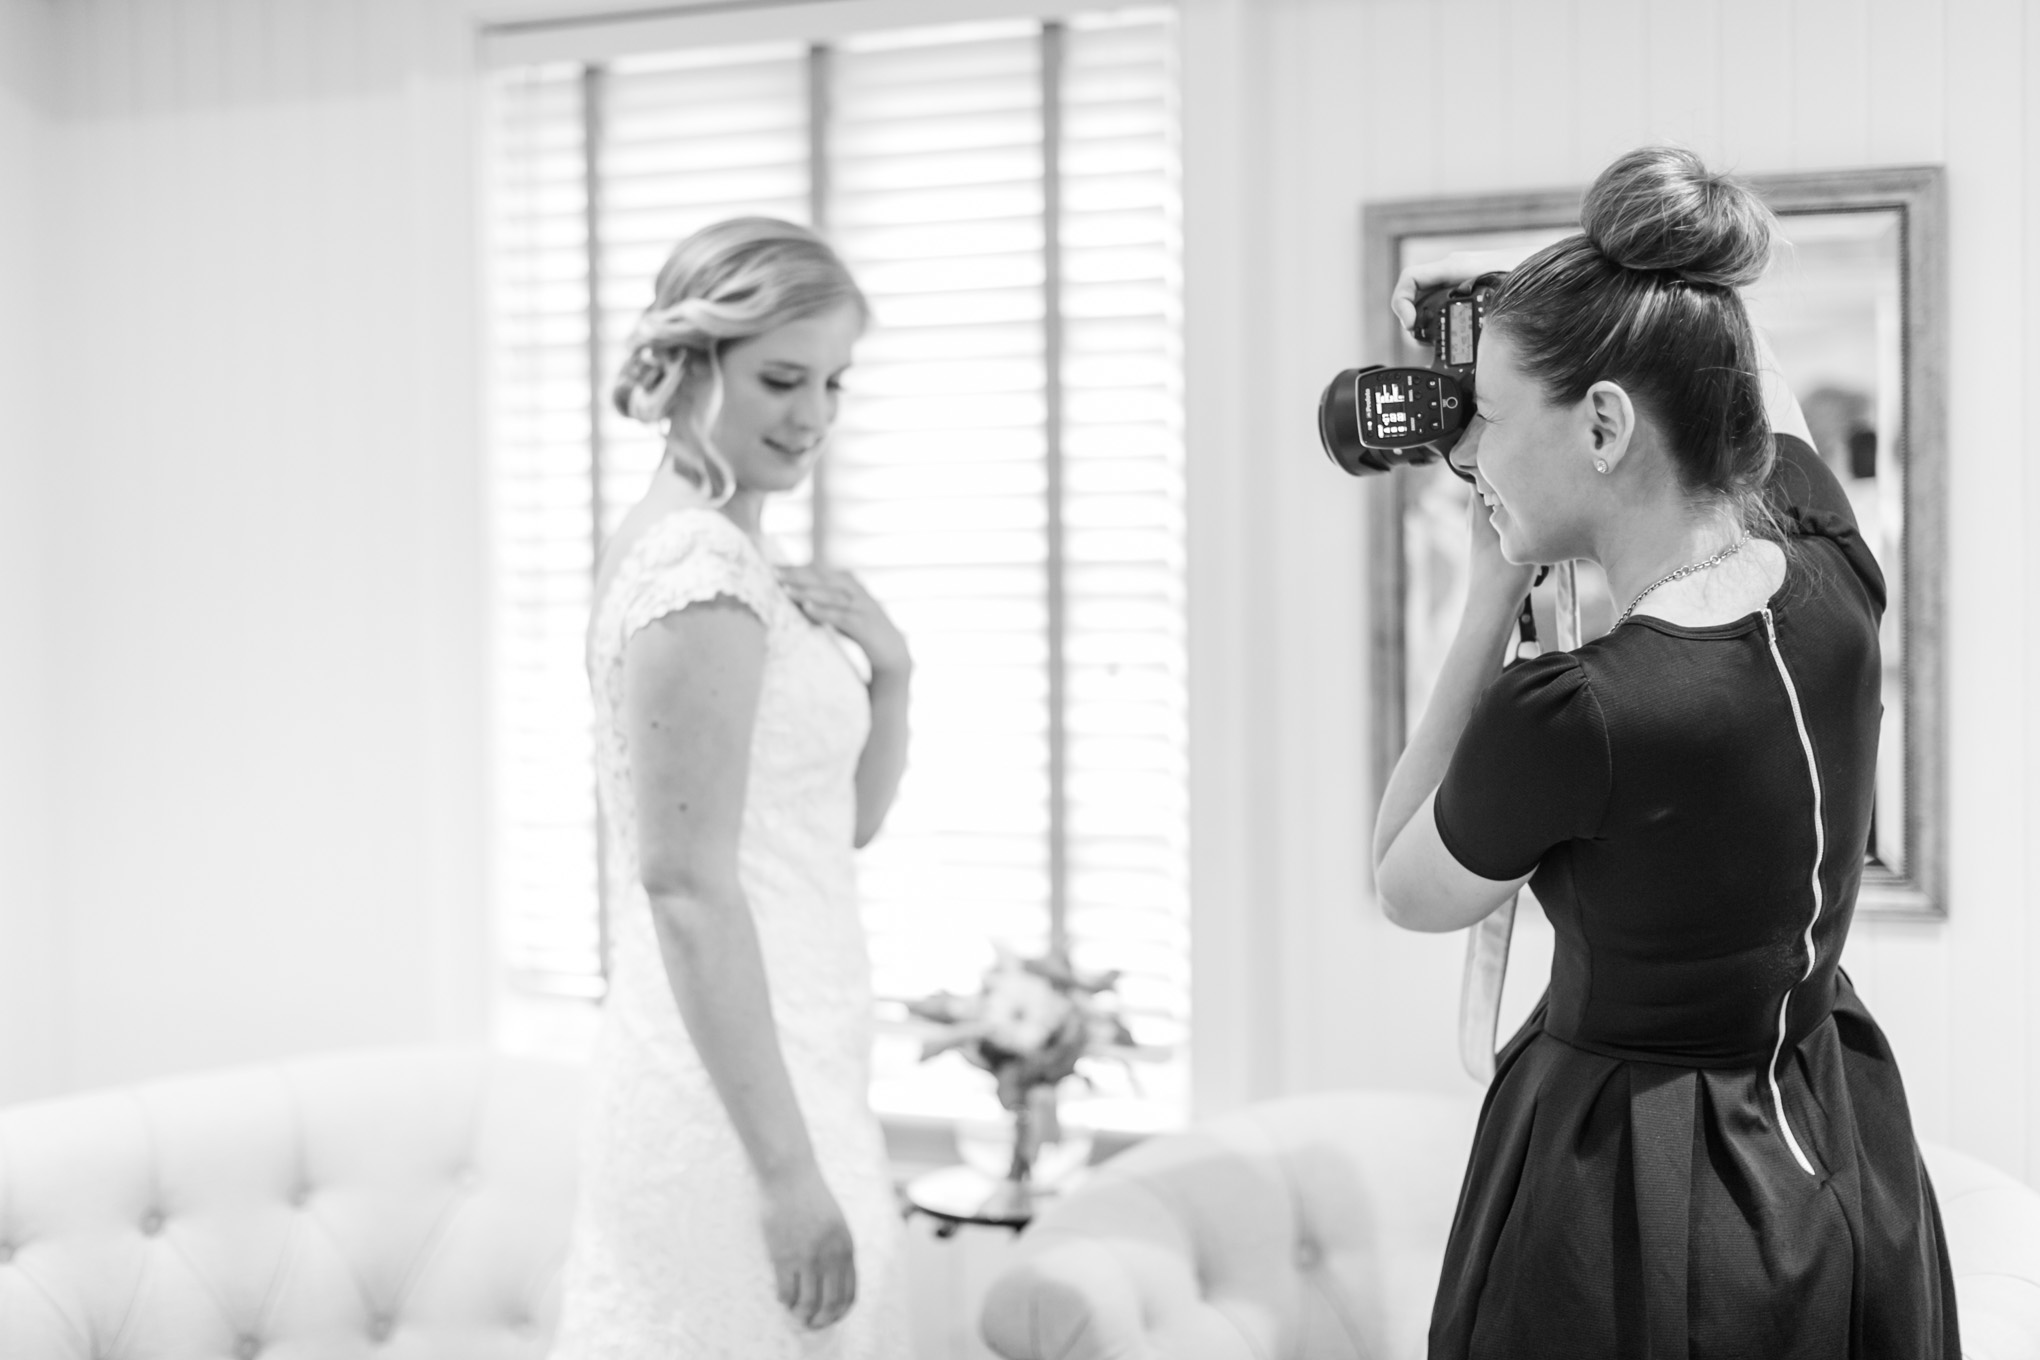 client experience, wedding photography, wedding photography investment, wedding photographer, Virginia wedding photographer, Maryland wedding photographer, behind the scenes, photographer taking photos, black and white photo